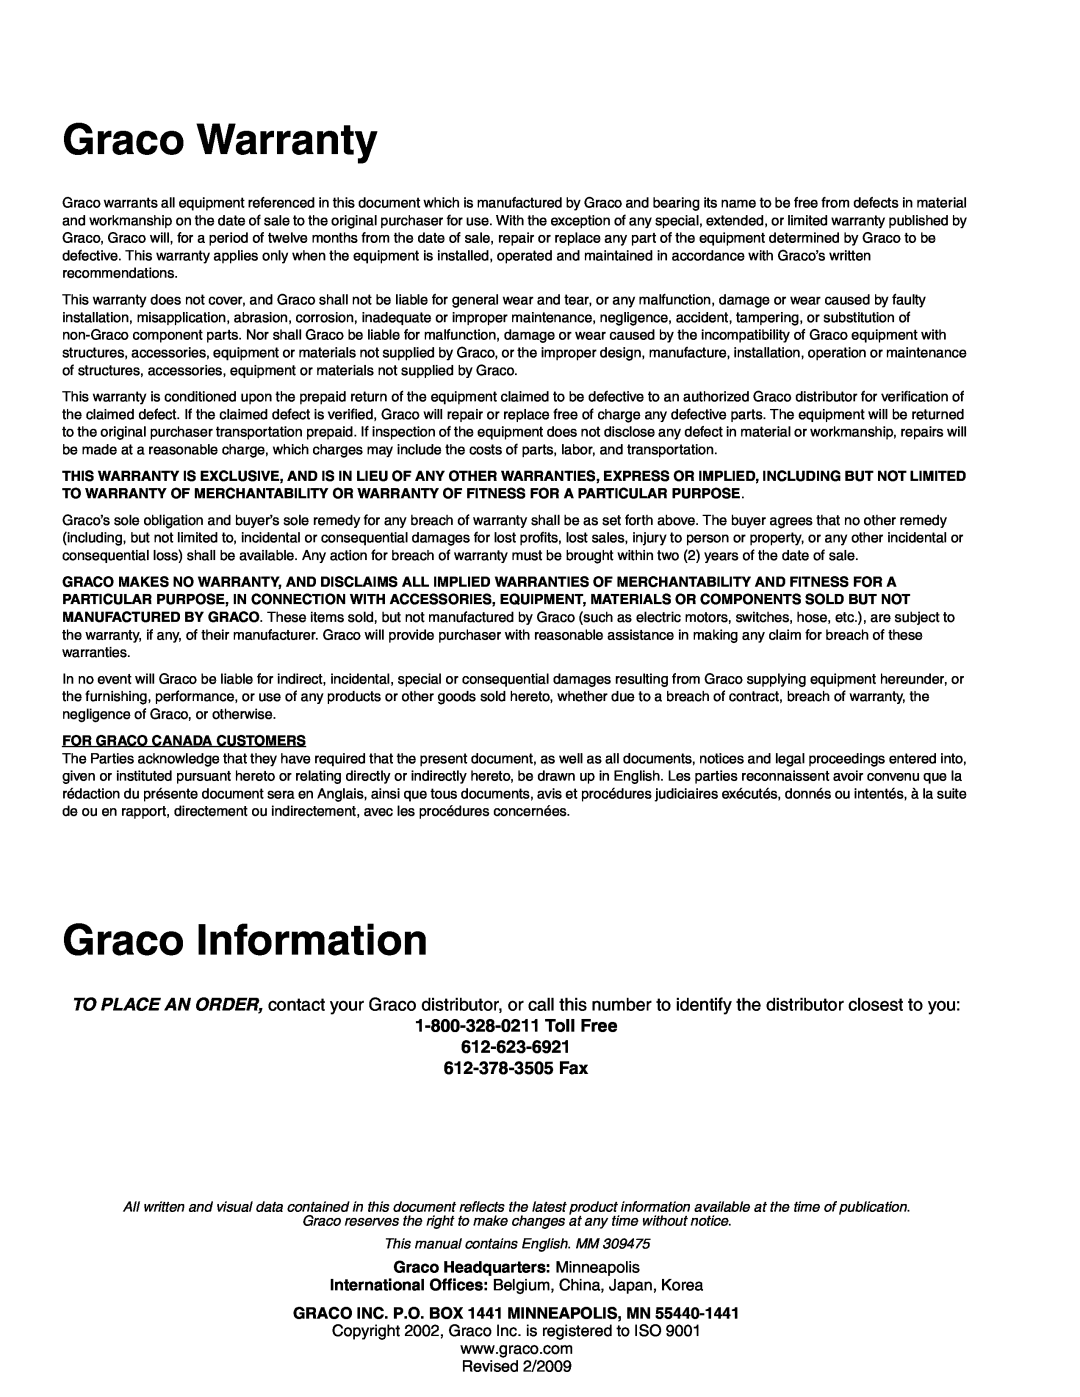 Graco Inc 309475F important safety instructions Graco Warranty, Graco Information 